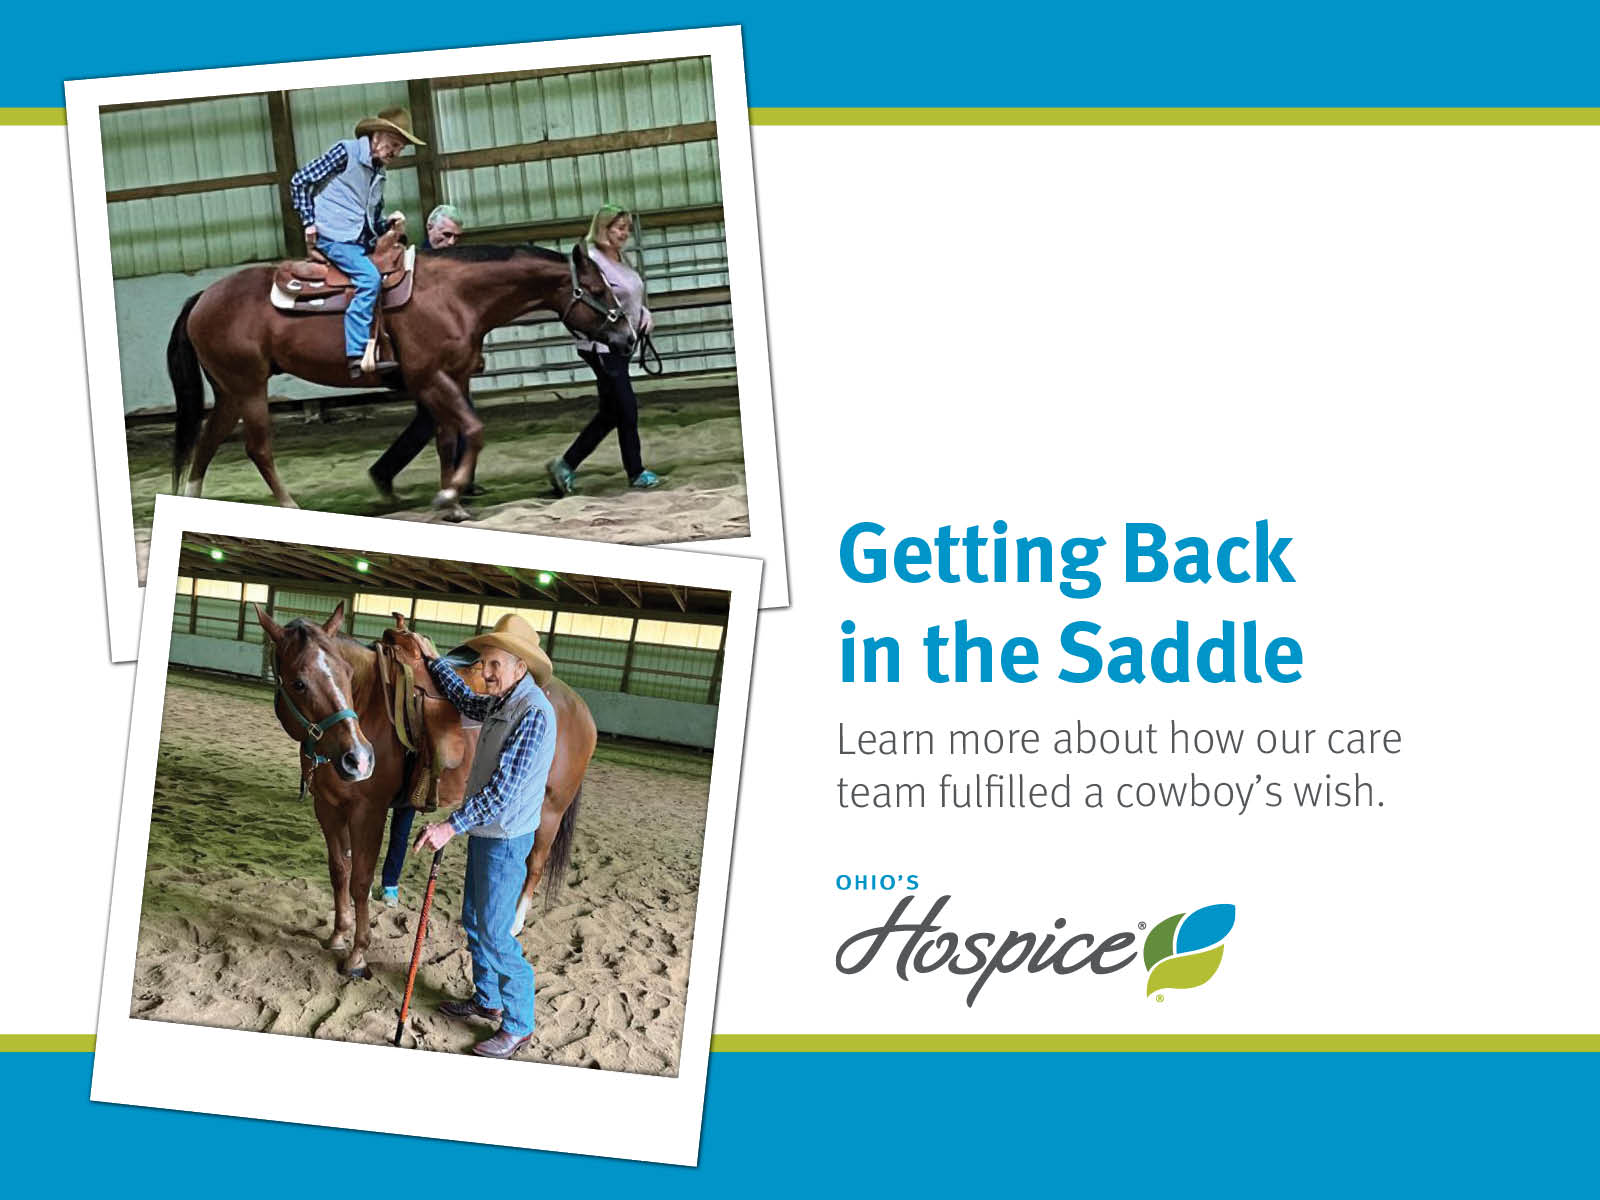 Getting Back in the Saddle. Learn more about how our care team fulfilled a cowboy's wish. Ohio's Hospice